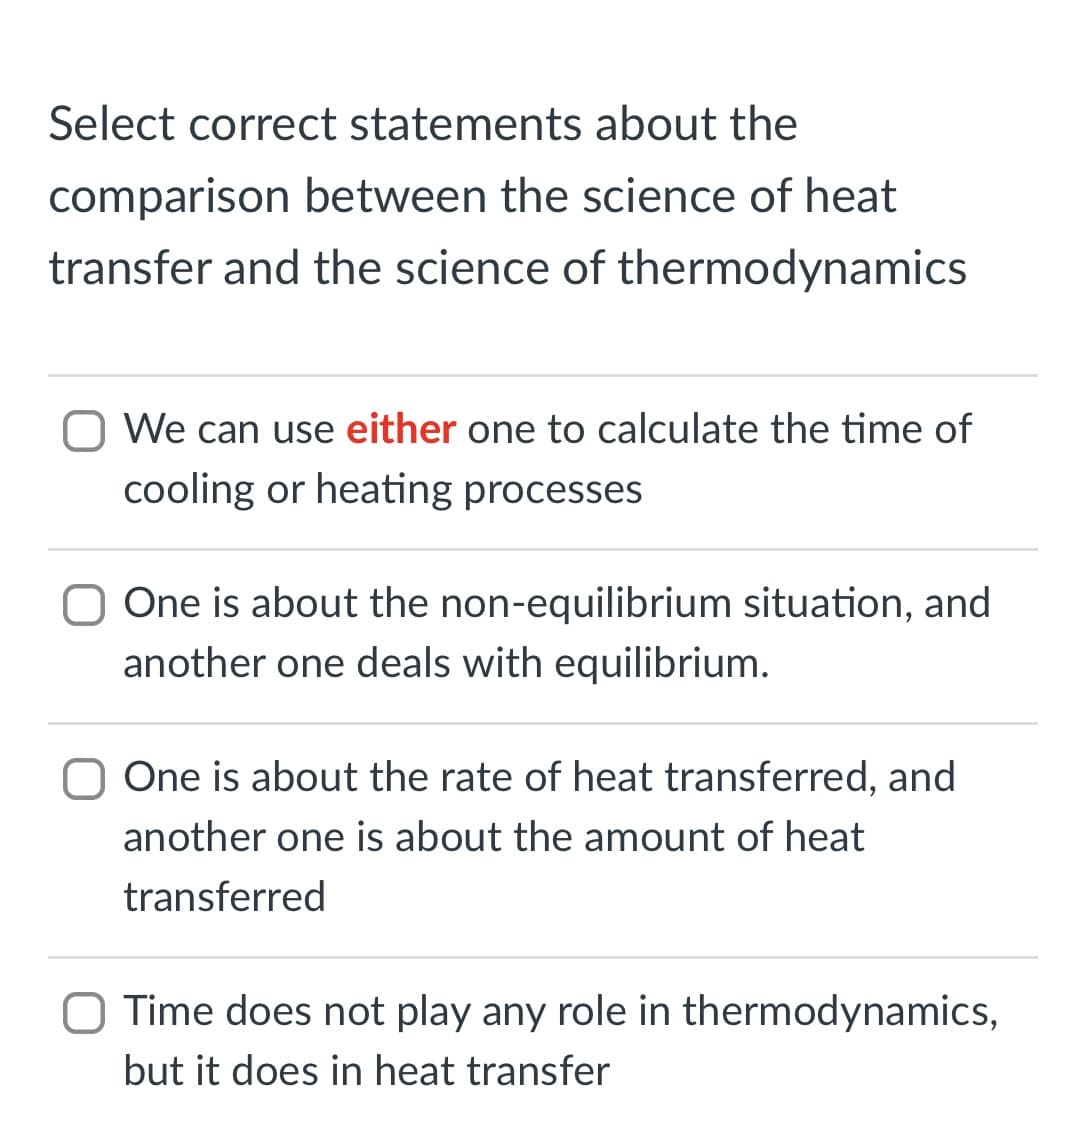 Select correct statements about the
comparison between the science of heat
transfer and the science of thermodynamics
O We can use either one to calculate the time of
cooling or heating processes
One is about the non-equilibrium situation, and
another one deals with equilibrium.
O One is about the rate of heat transferred, and
another one is about the amount of heat
transferred
O Time does not play any role in thermodynamics,
but it does in heat transfer
